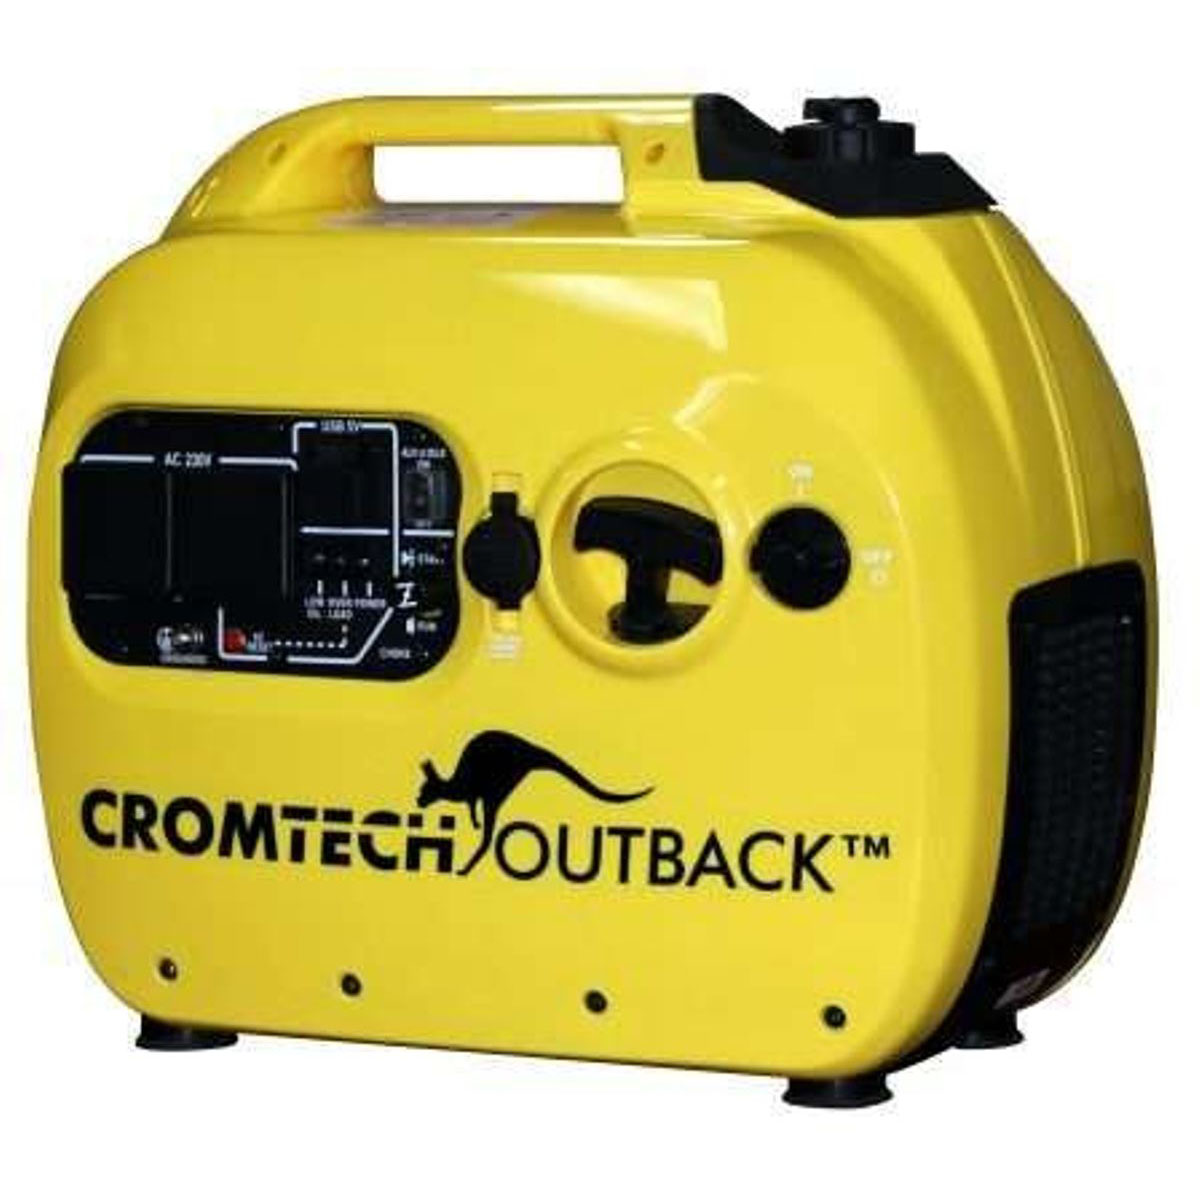 Crotech Outback Inverter Generator 24kW 